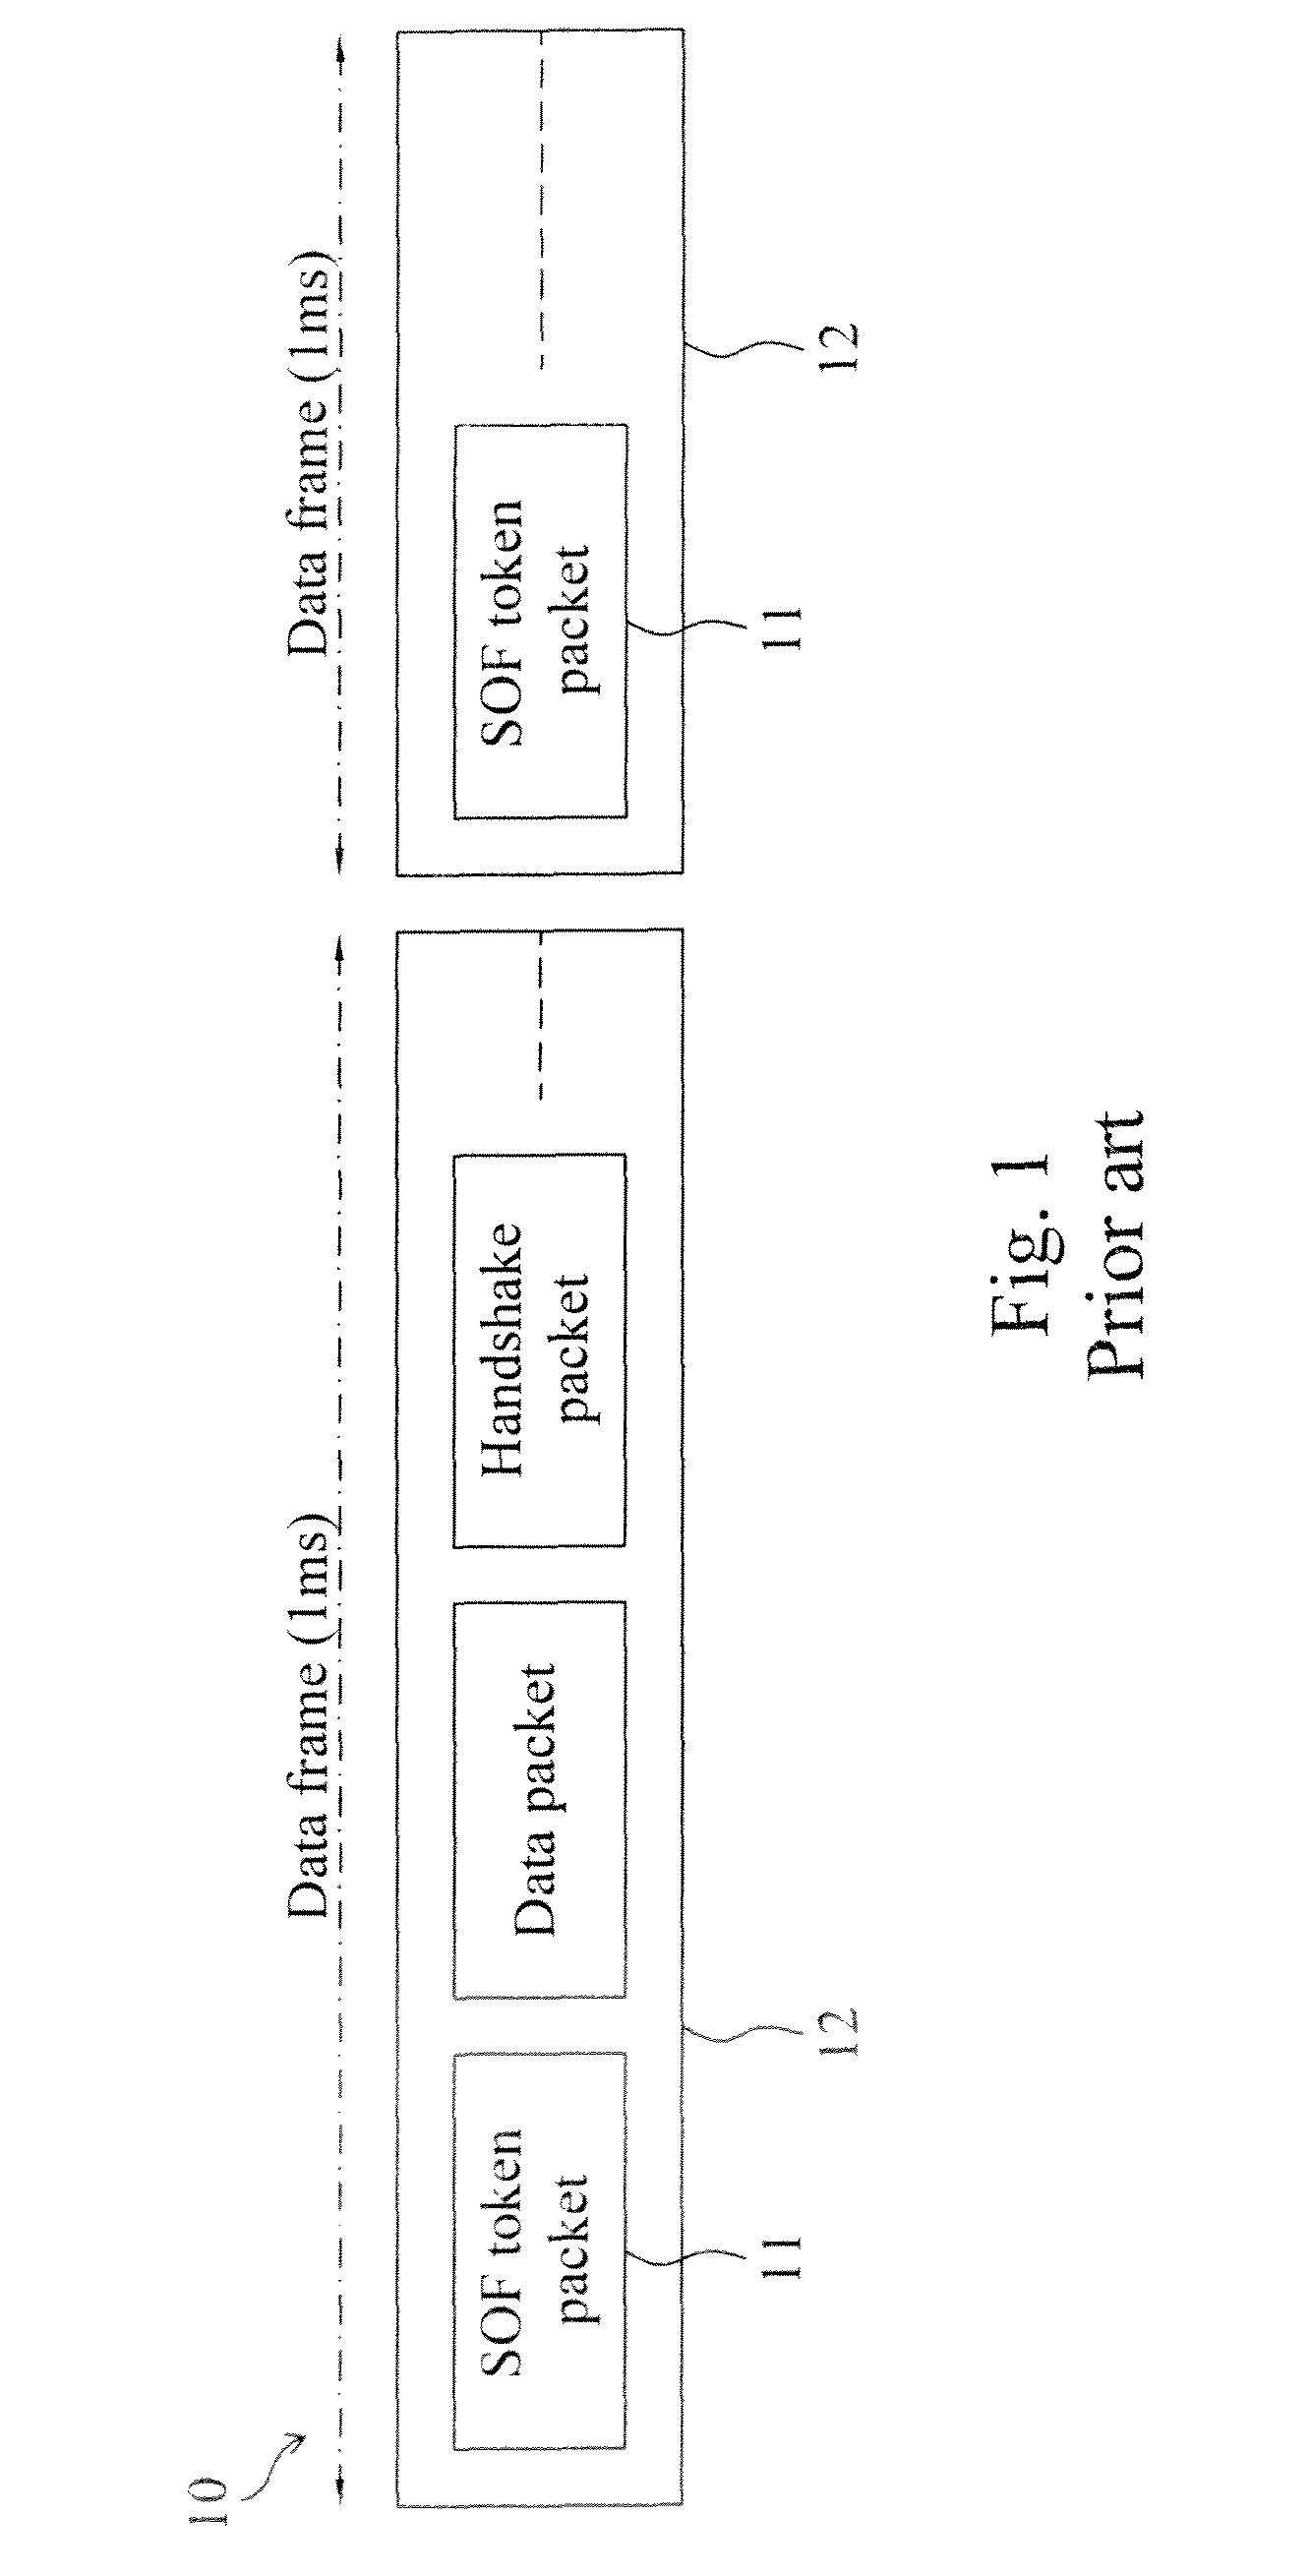 Method and circuit for trimming an internal oscillator of a USB device according to a counting number between a first and second clock count value